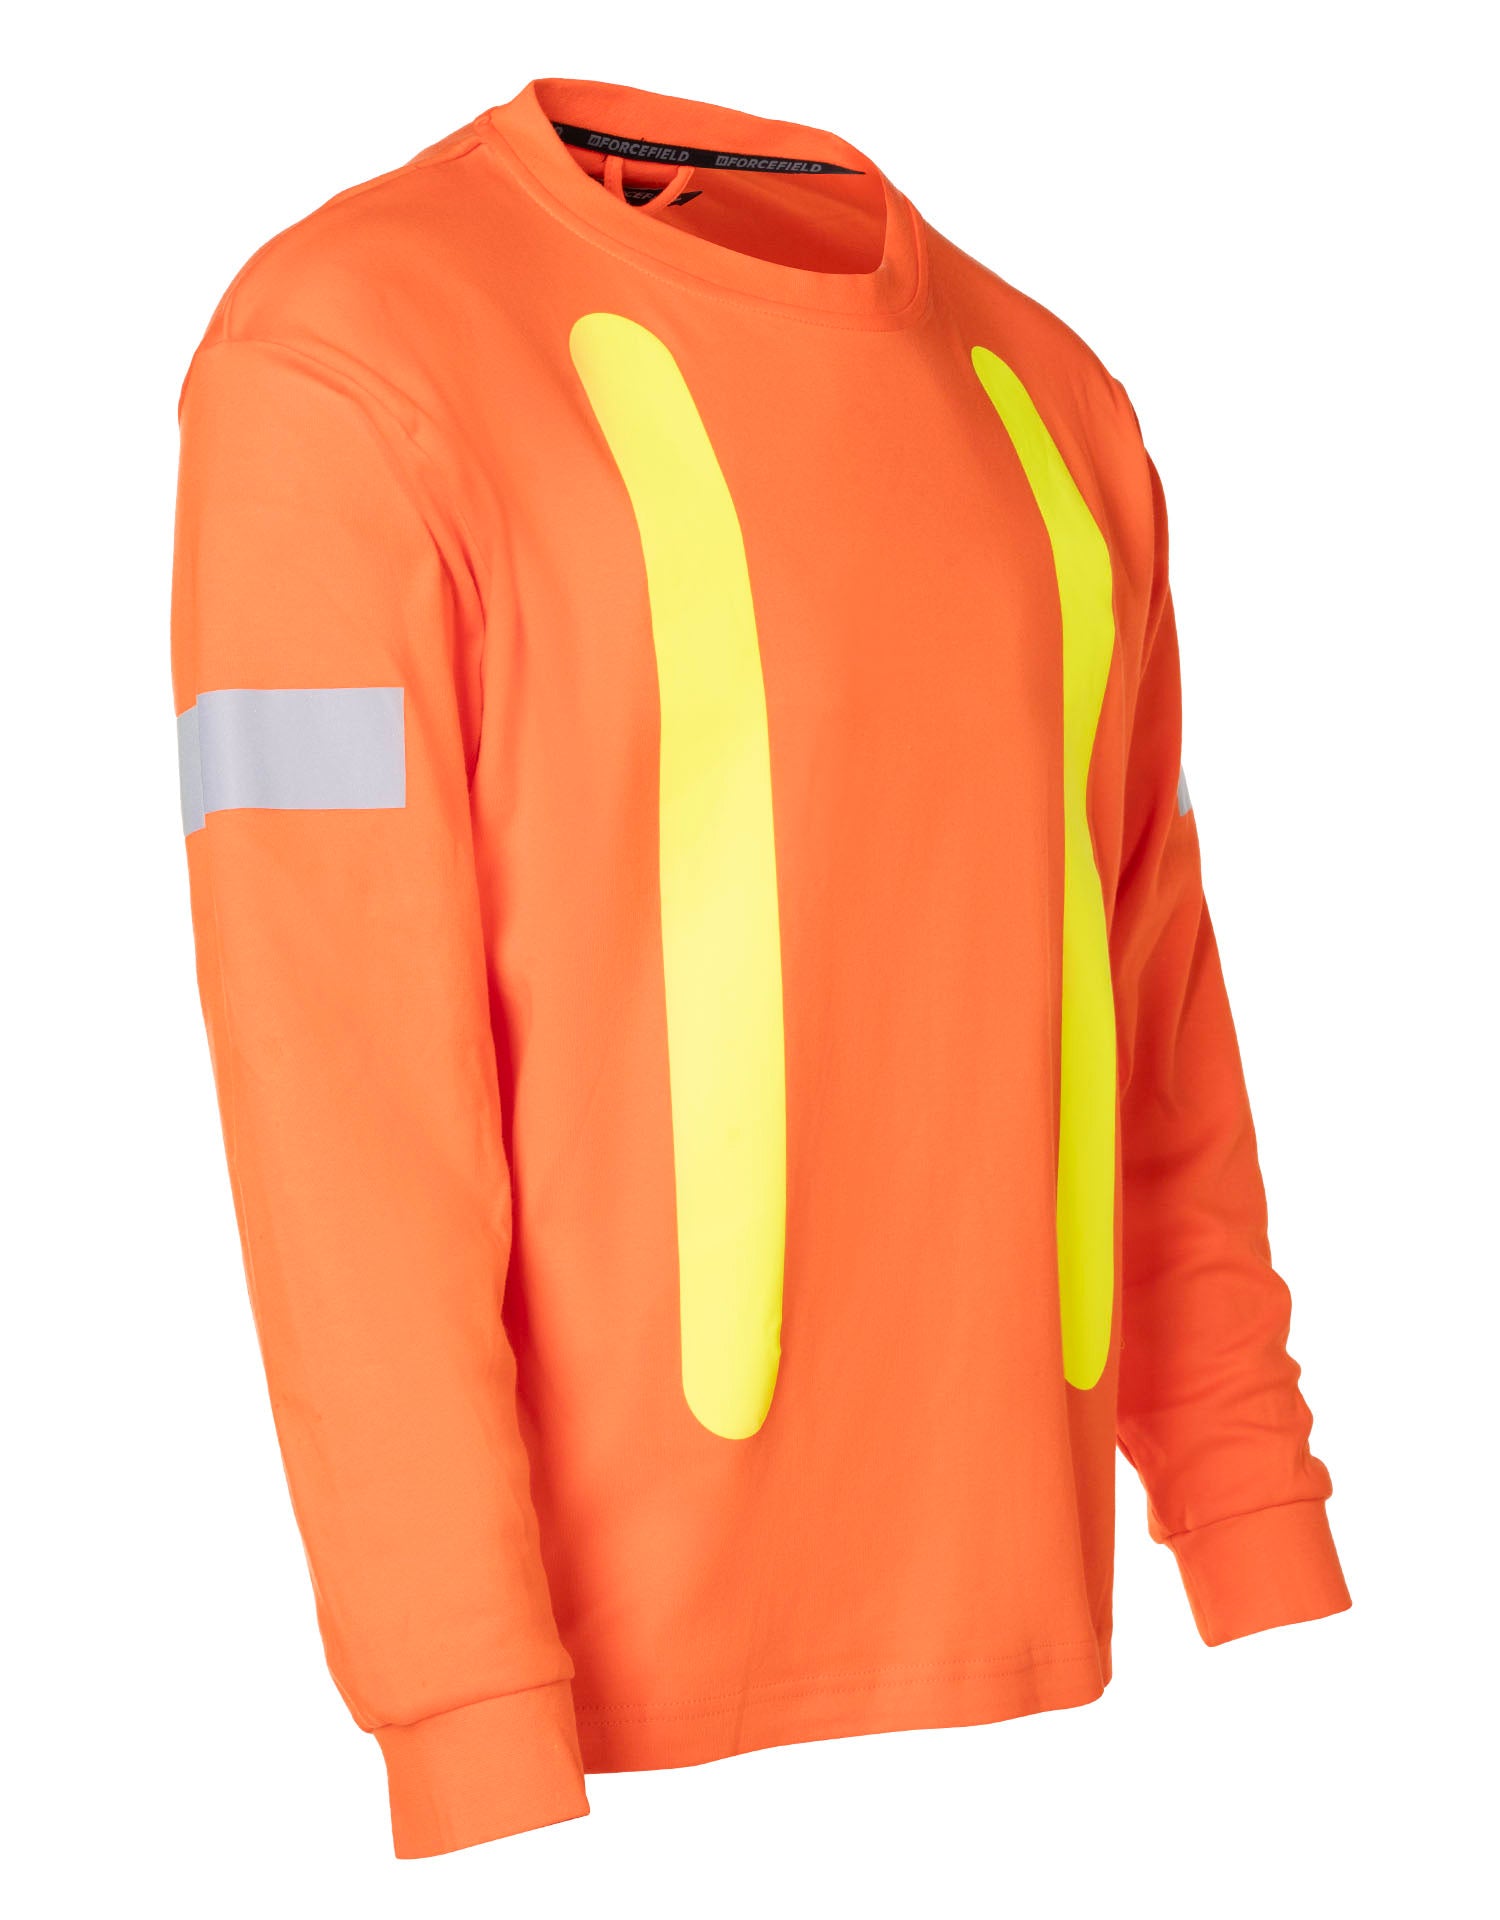 Retro Safety Cotton Long Sleeve Tee With Reflective Arm Striping